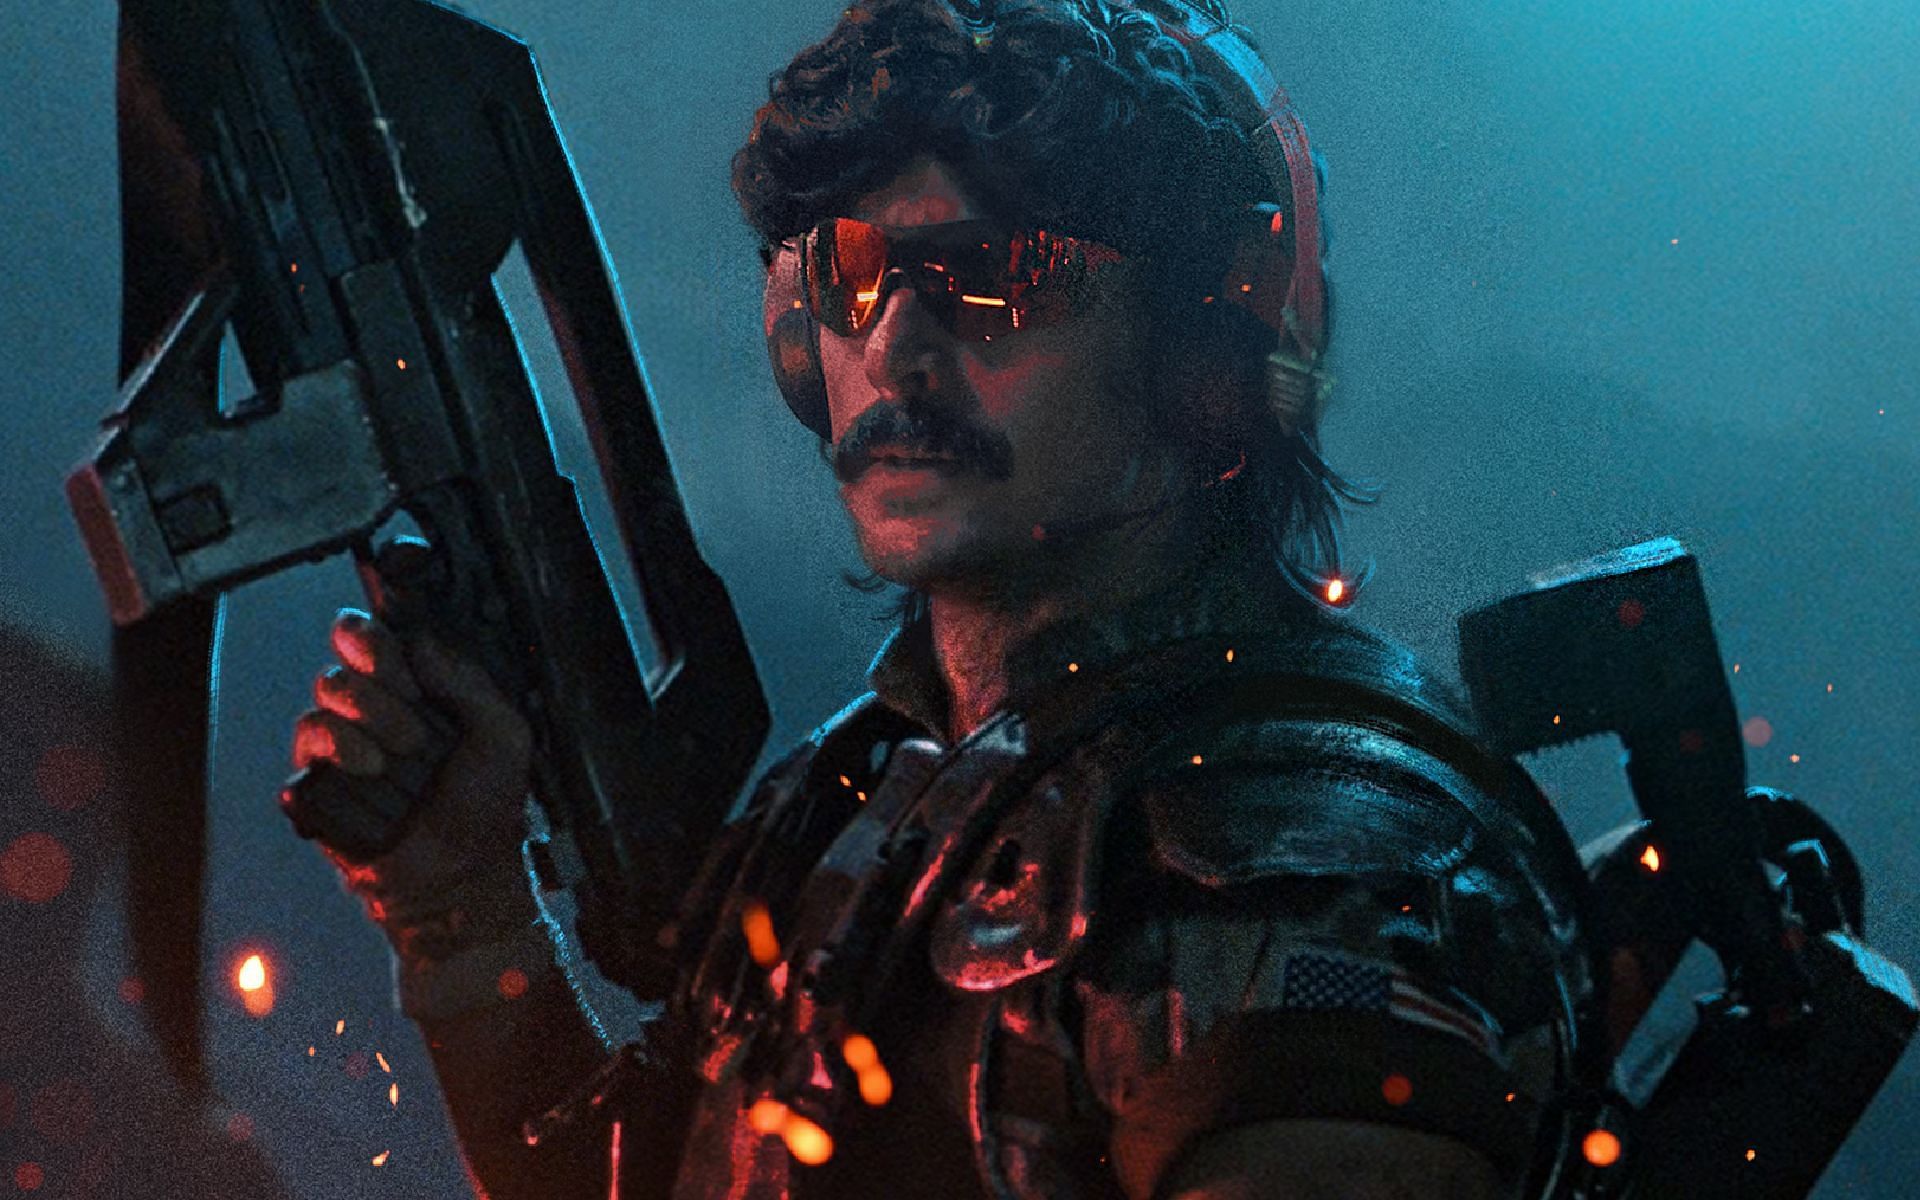 Dr DisRespect provides his take on how sniper rifles in video games should work, thousands of fans join the conversation (Image via Dr DisRespect/Twitter)